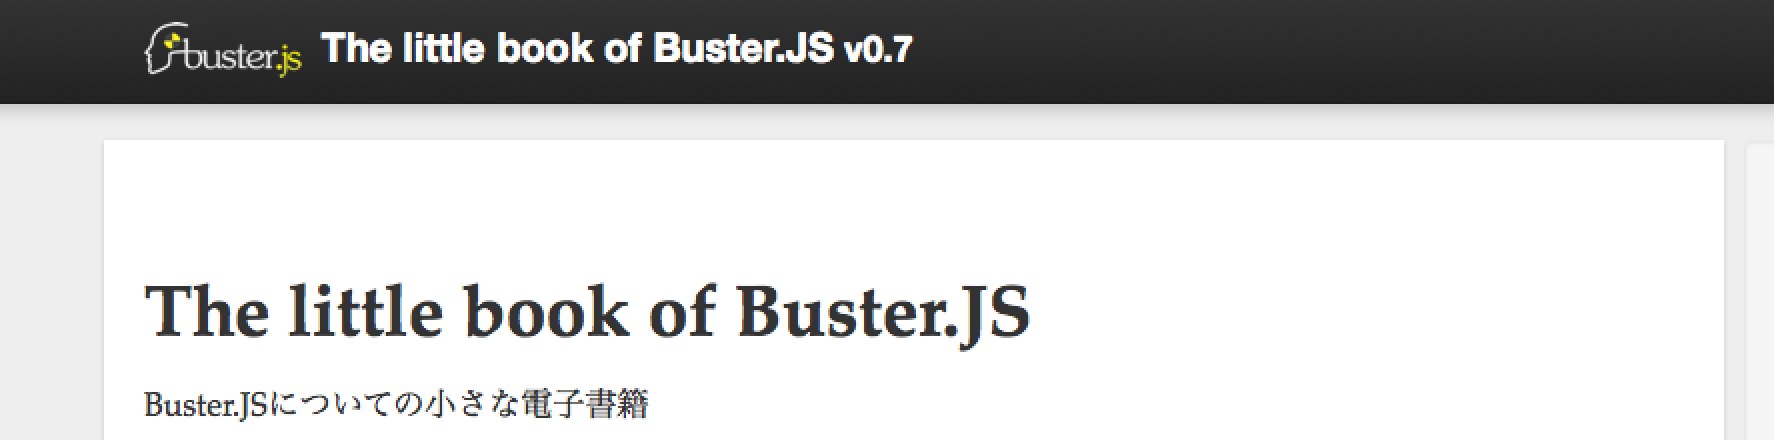 The little book of Buster.JS.png